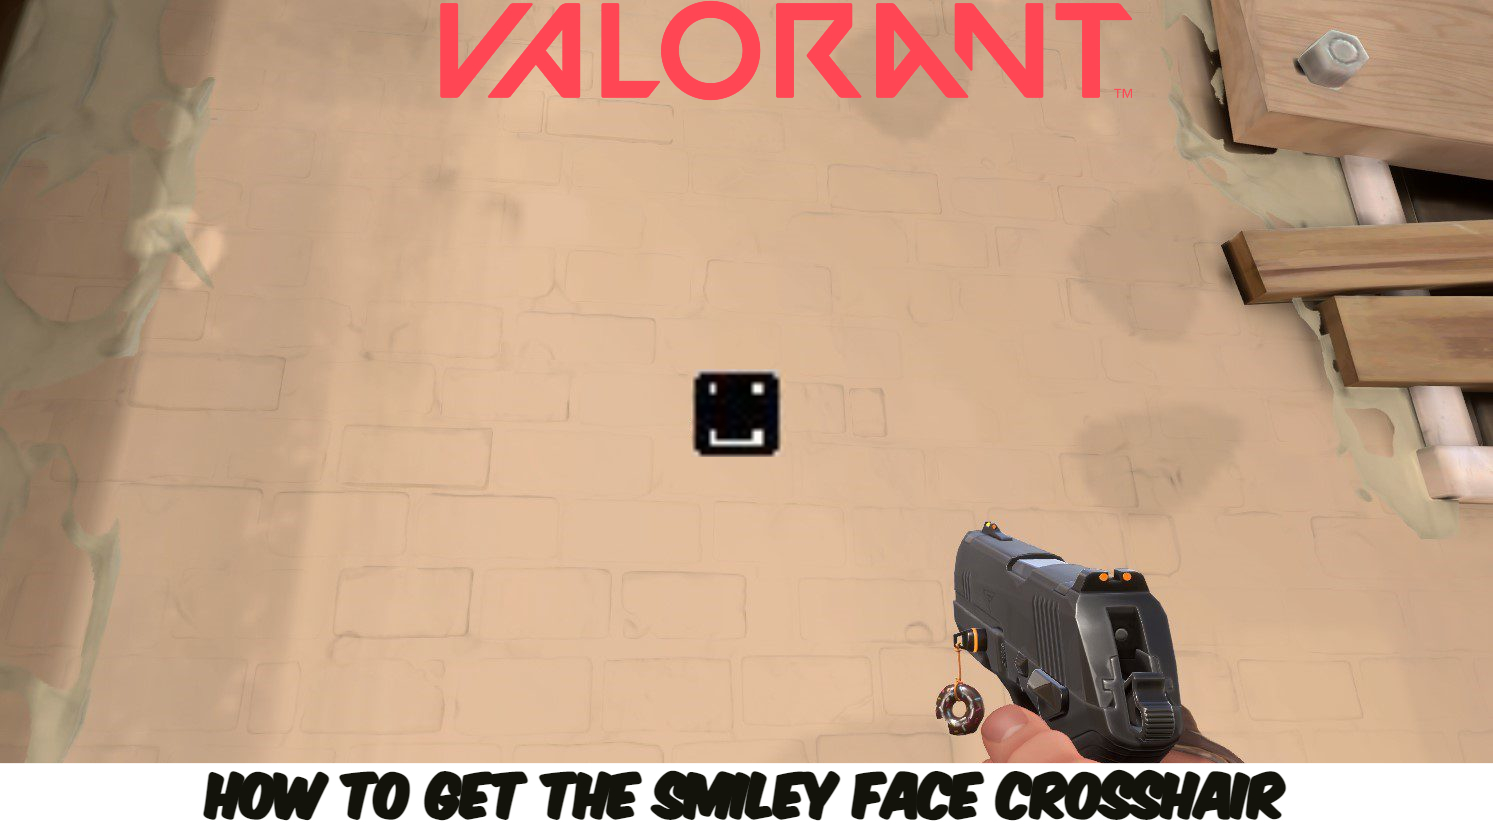 You are currently viewing Valorant: How to Get the Smiley Face Crosshair